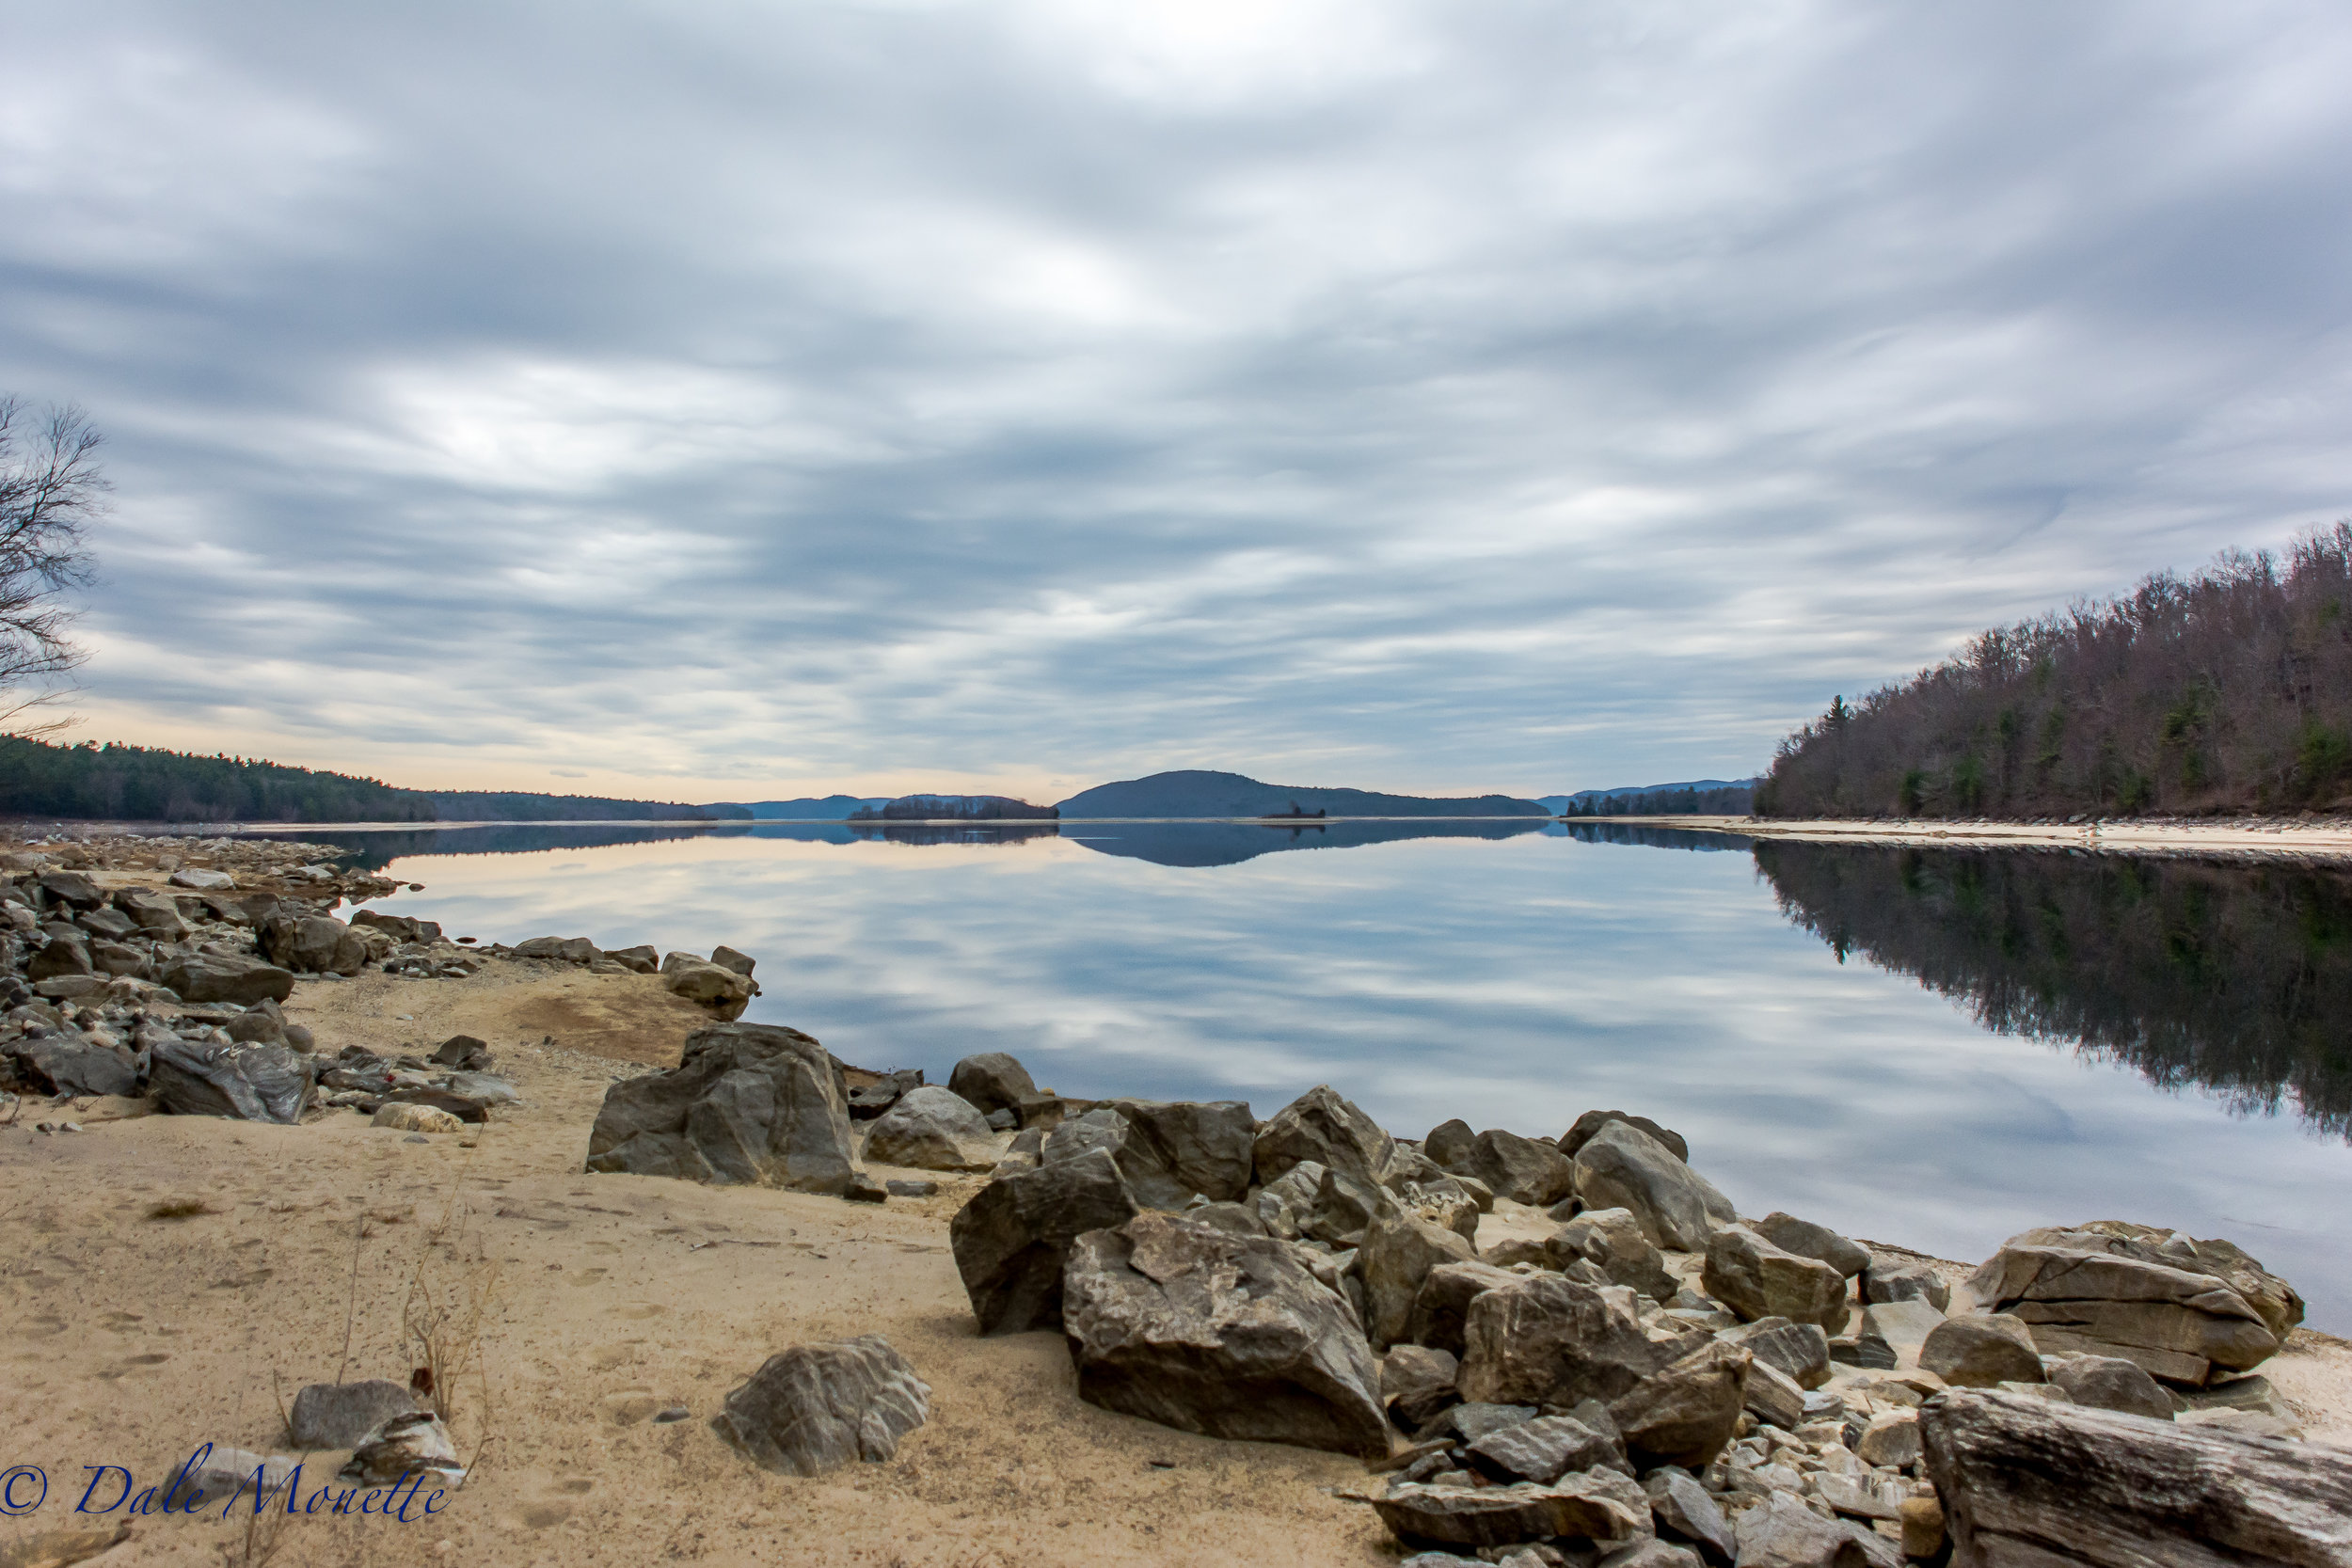   The last 2 morning at Quabbin have been pretty slow, especially today. i've spent 10 hours along the shore in coyote-ville with no luck. Today on the way out the sky was pretty awesome with the rain slowly rolling in. 4/12/17  